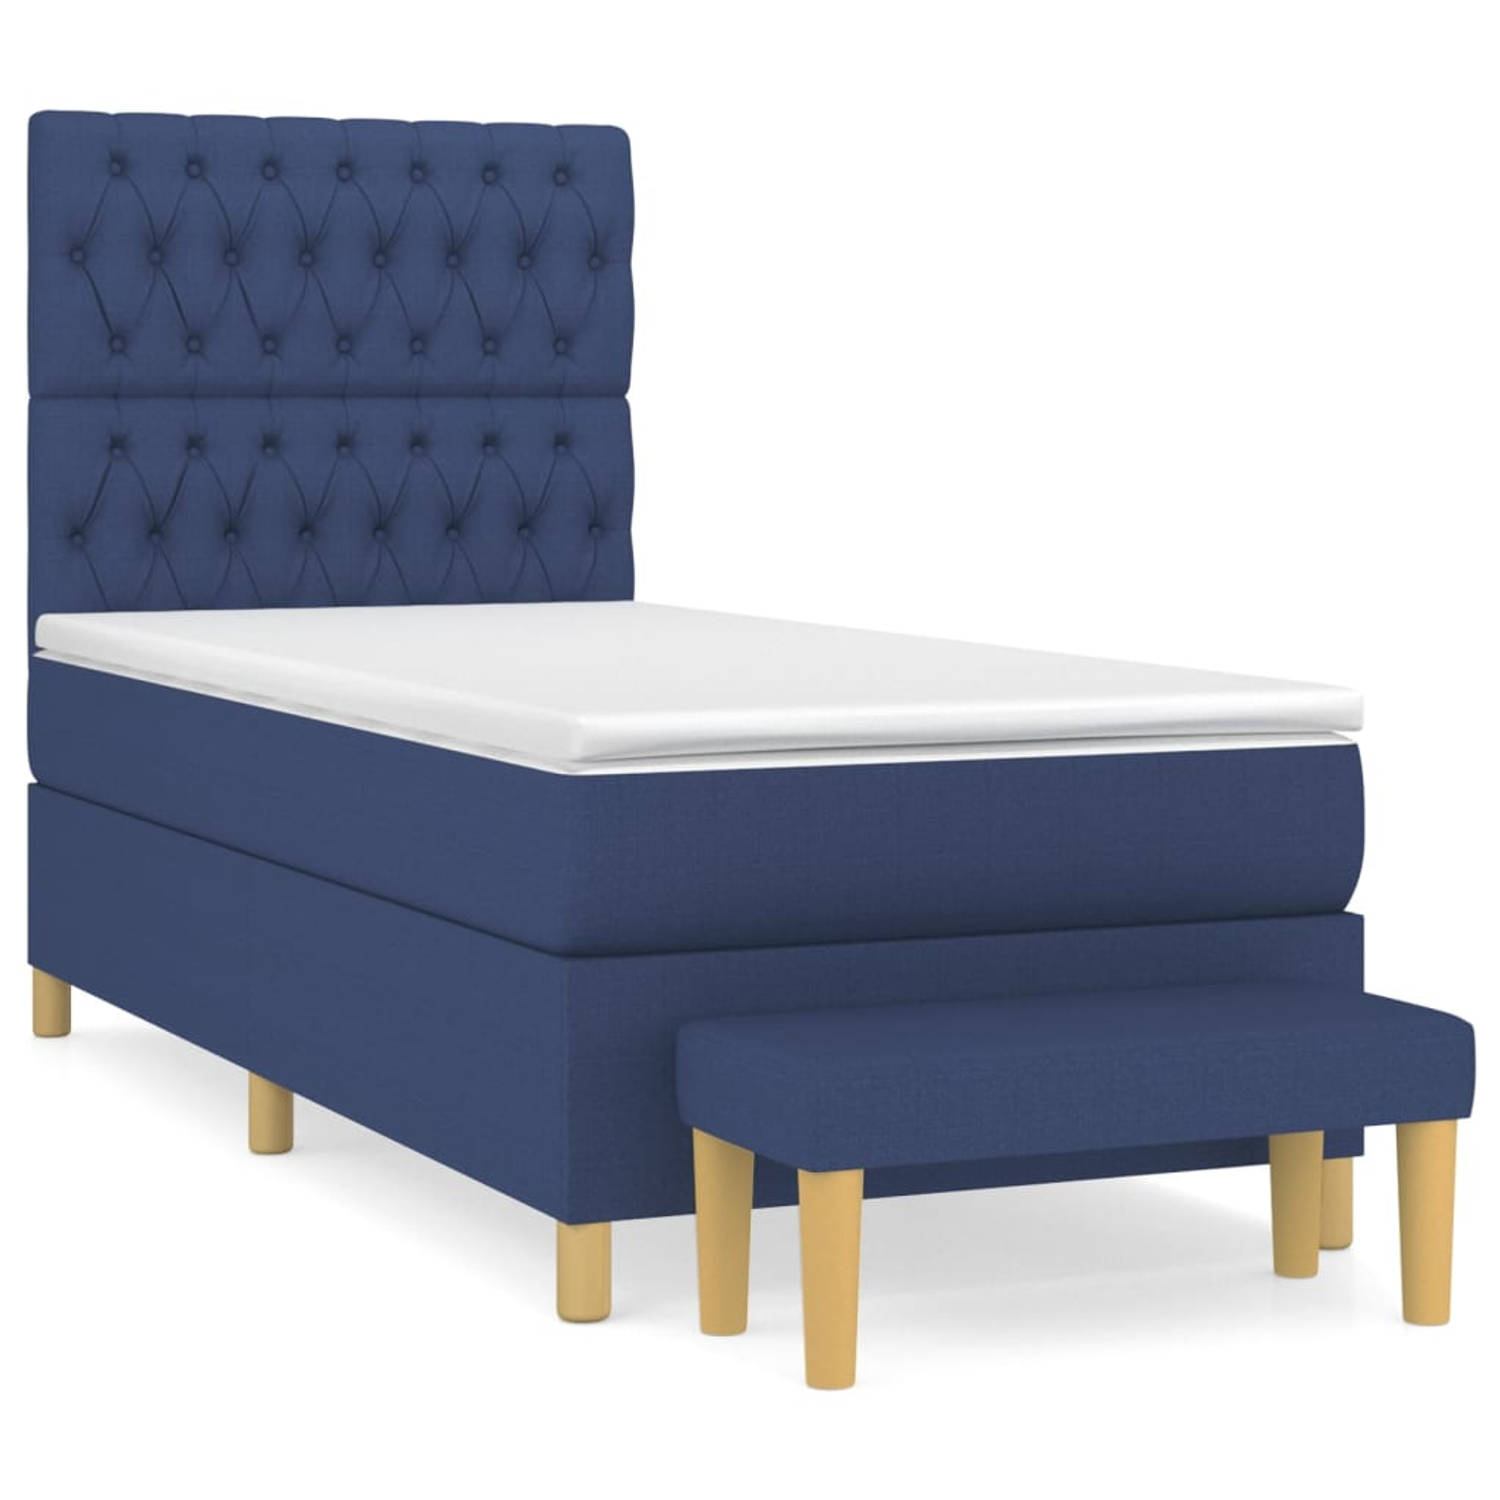 The Living Store Boxspring met matras stof blauw 90x200 cm - Boxspring - Boxsprings - Pocketveringbed - Bed - Slaapmeubel - Boxspringbed - Boxspring Bed - Eenpersoonsbed - Bed Met